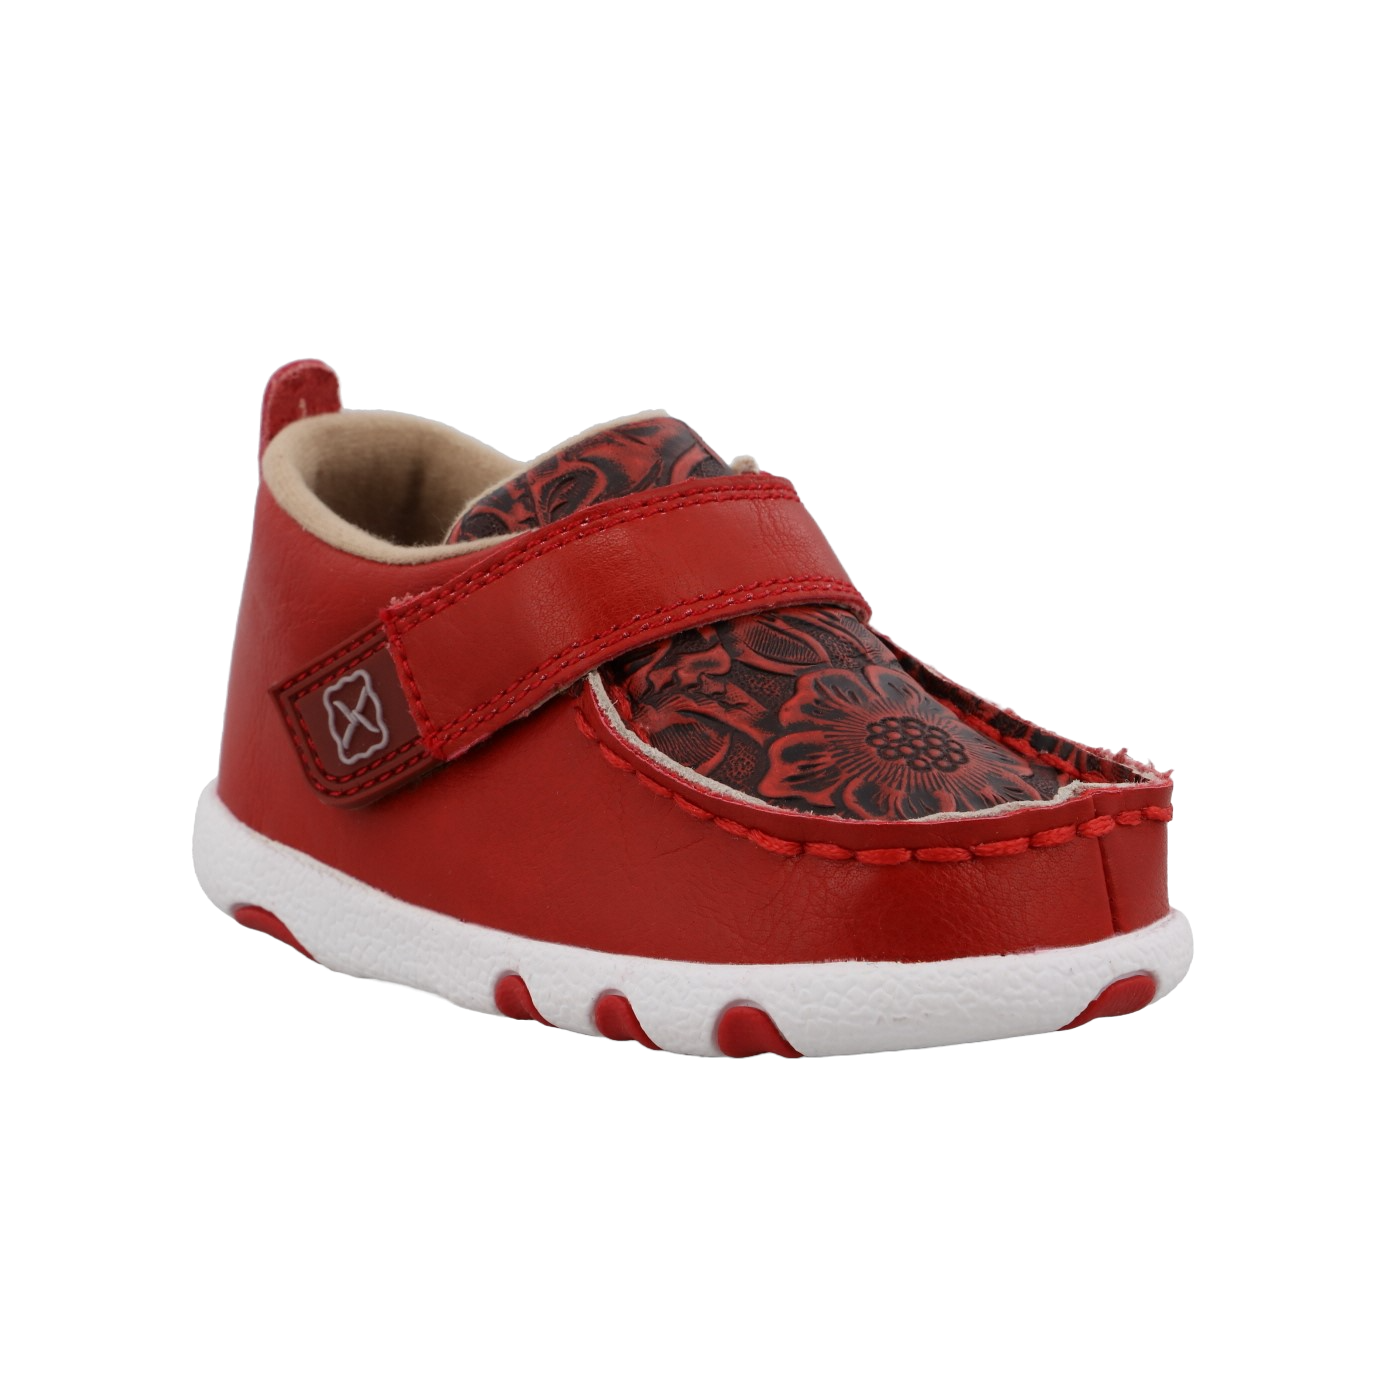 Twisted X Infants Floral Cherry & Tooled Red Slip On Shoes ICA0029